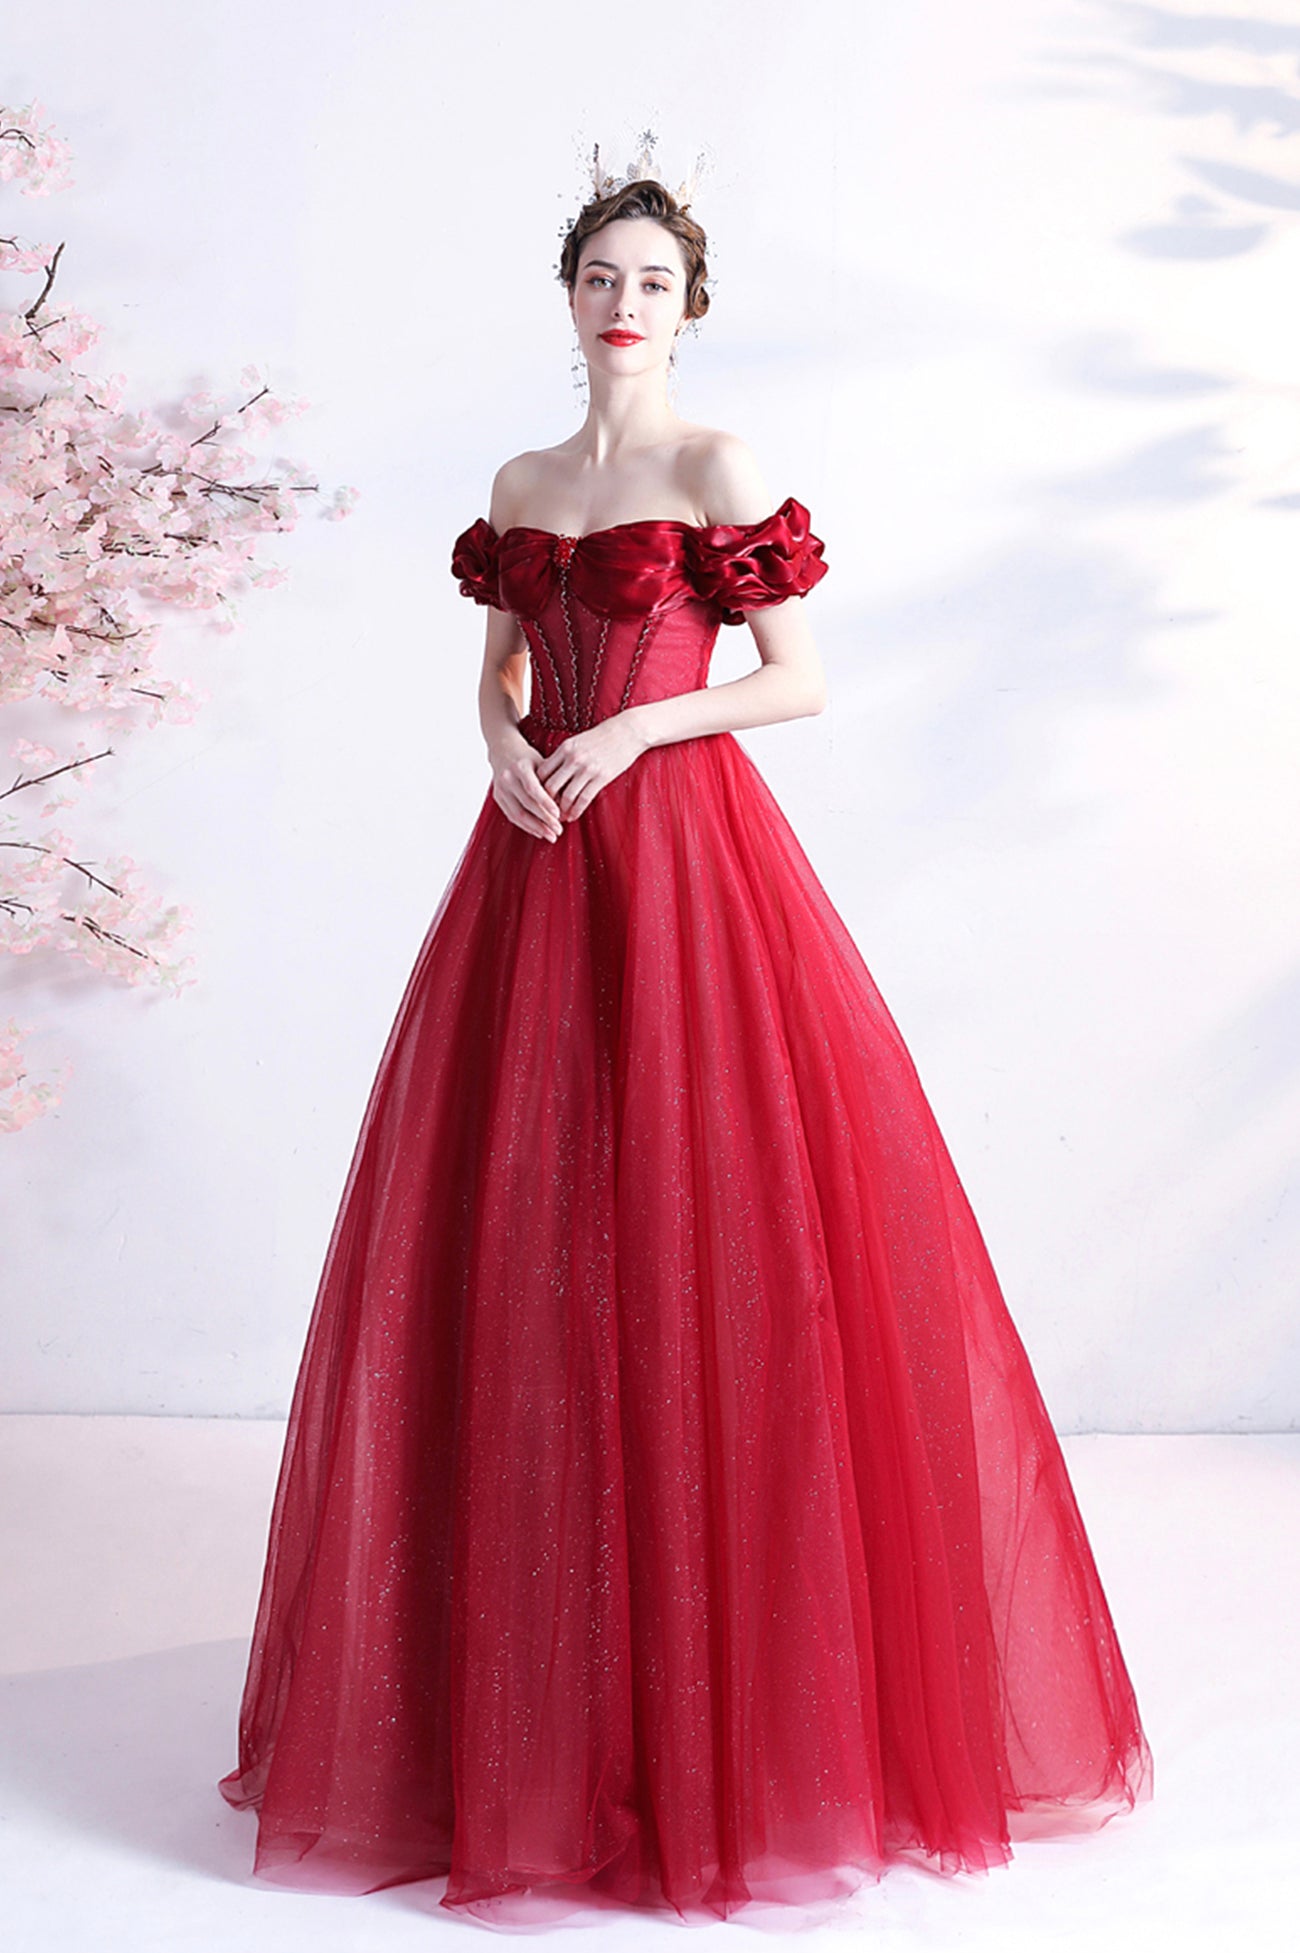 Red Tulle Off the Shoulder Long Prom Dress, A-Line Graduation Dress